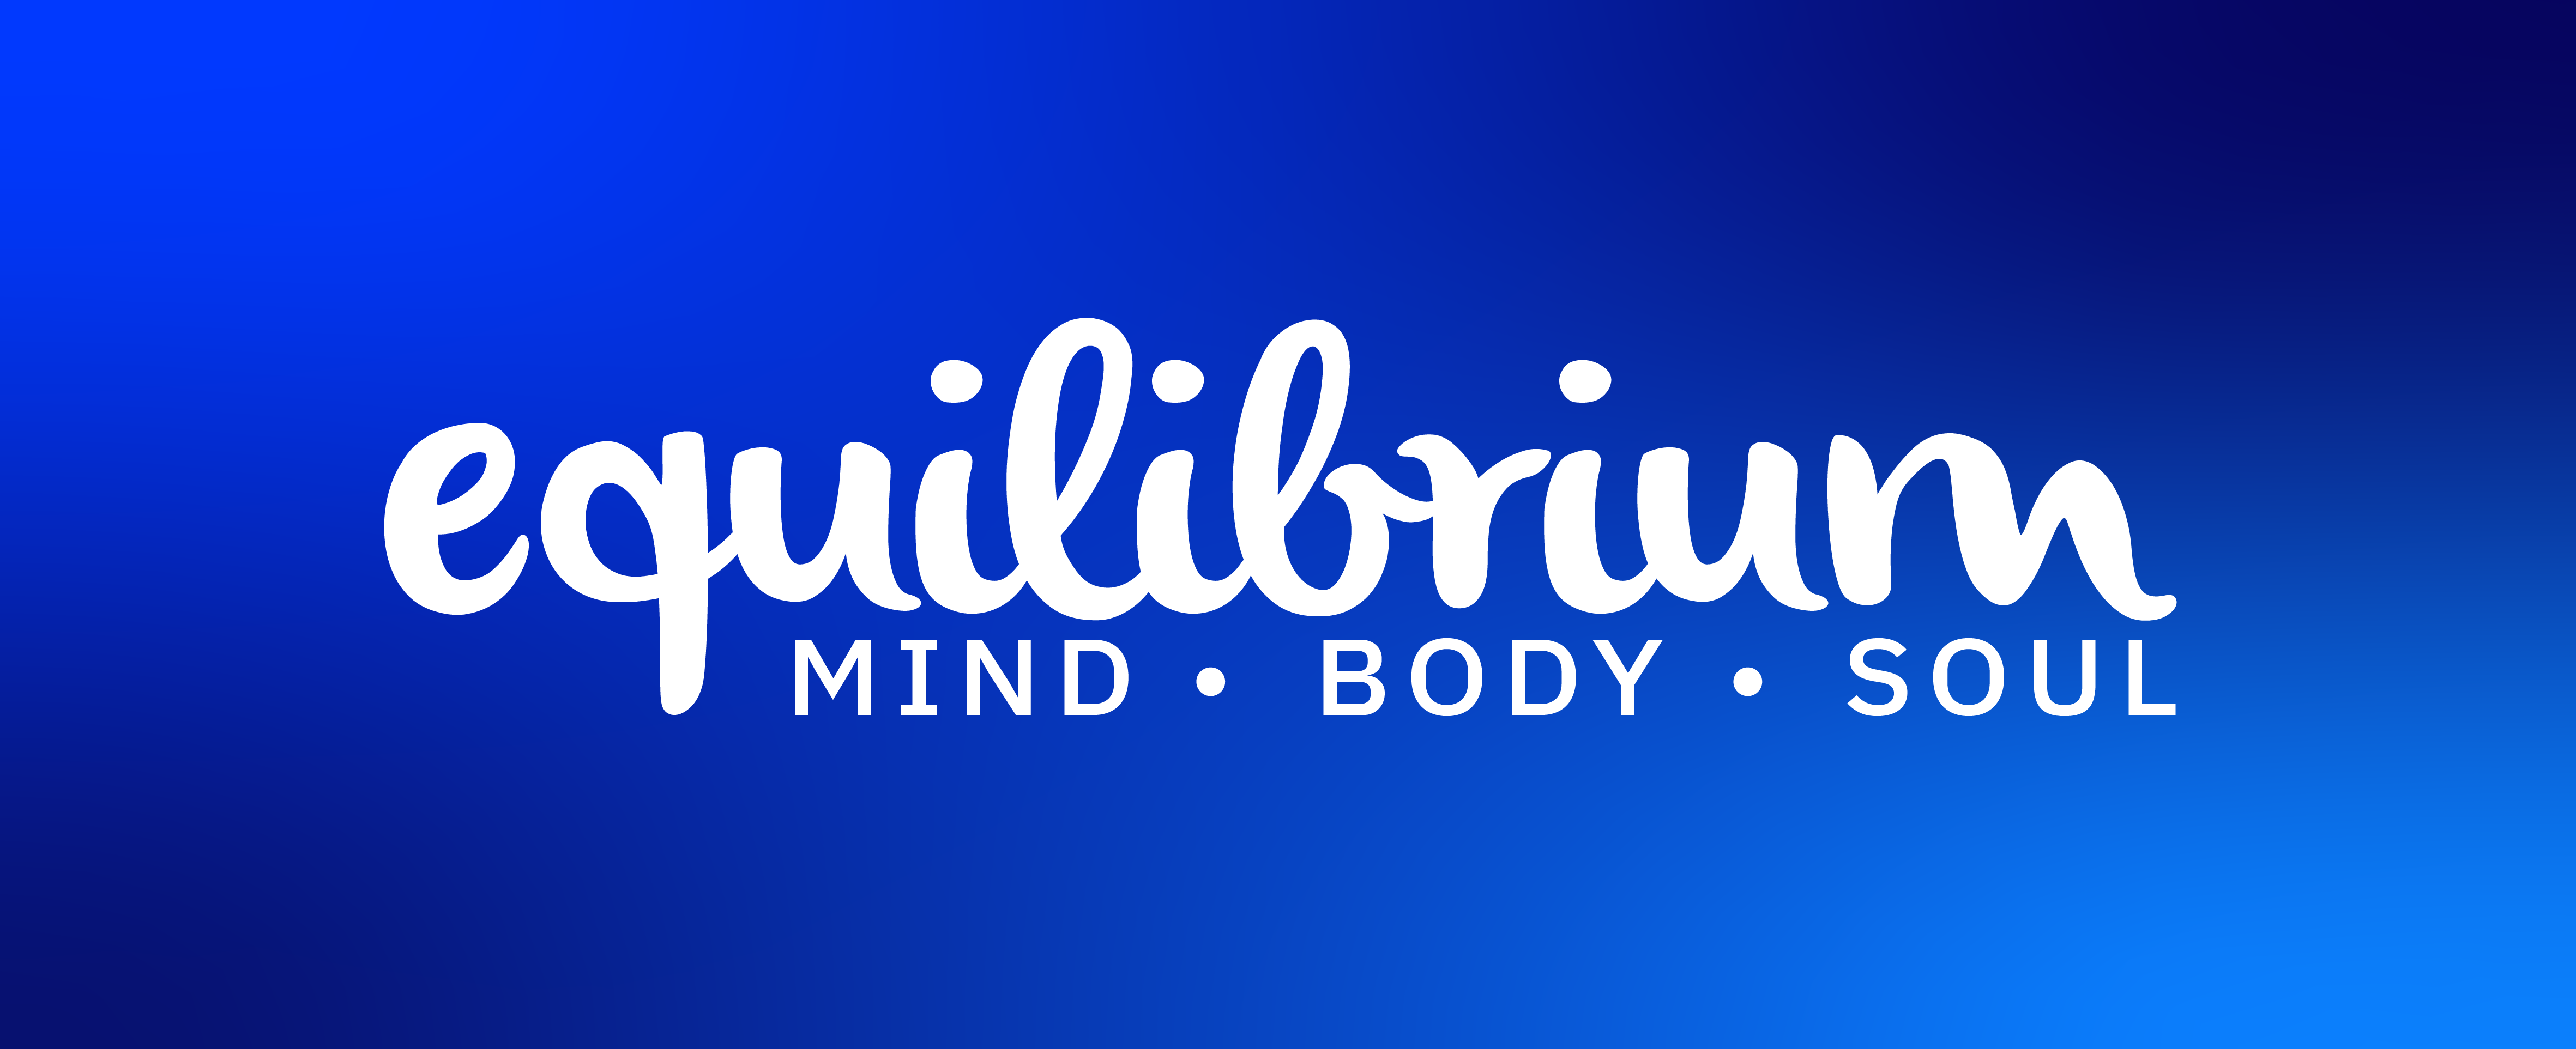 Equilibrium - A well-being program tailored to employees' needs